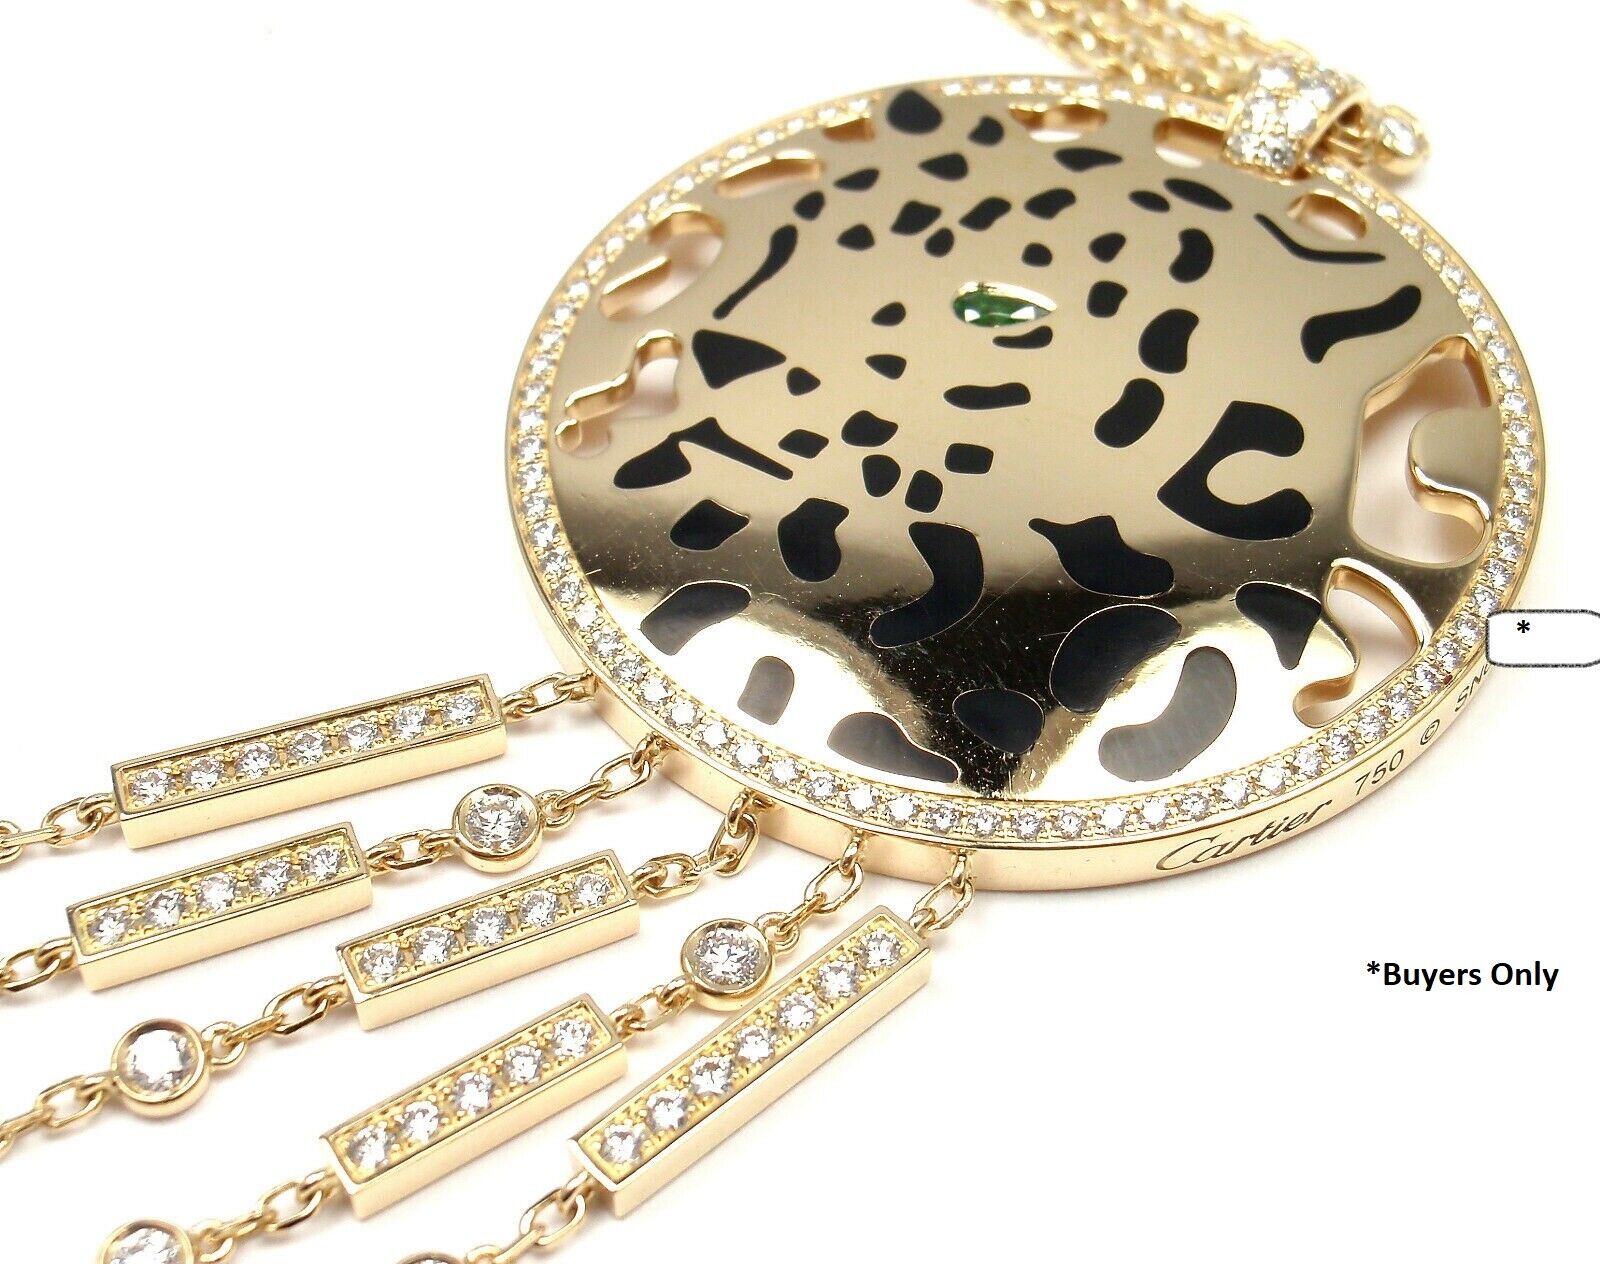 Cartier Jewelry & Watches:Fine Jewelry:Necklaces & Pendants Authentic! Cartier Panther 18k Yellow Gold Diamond Tsavorite Lacquer Necklace